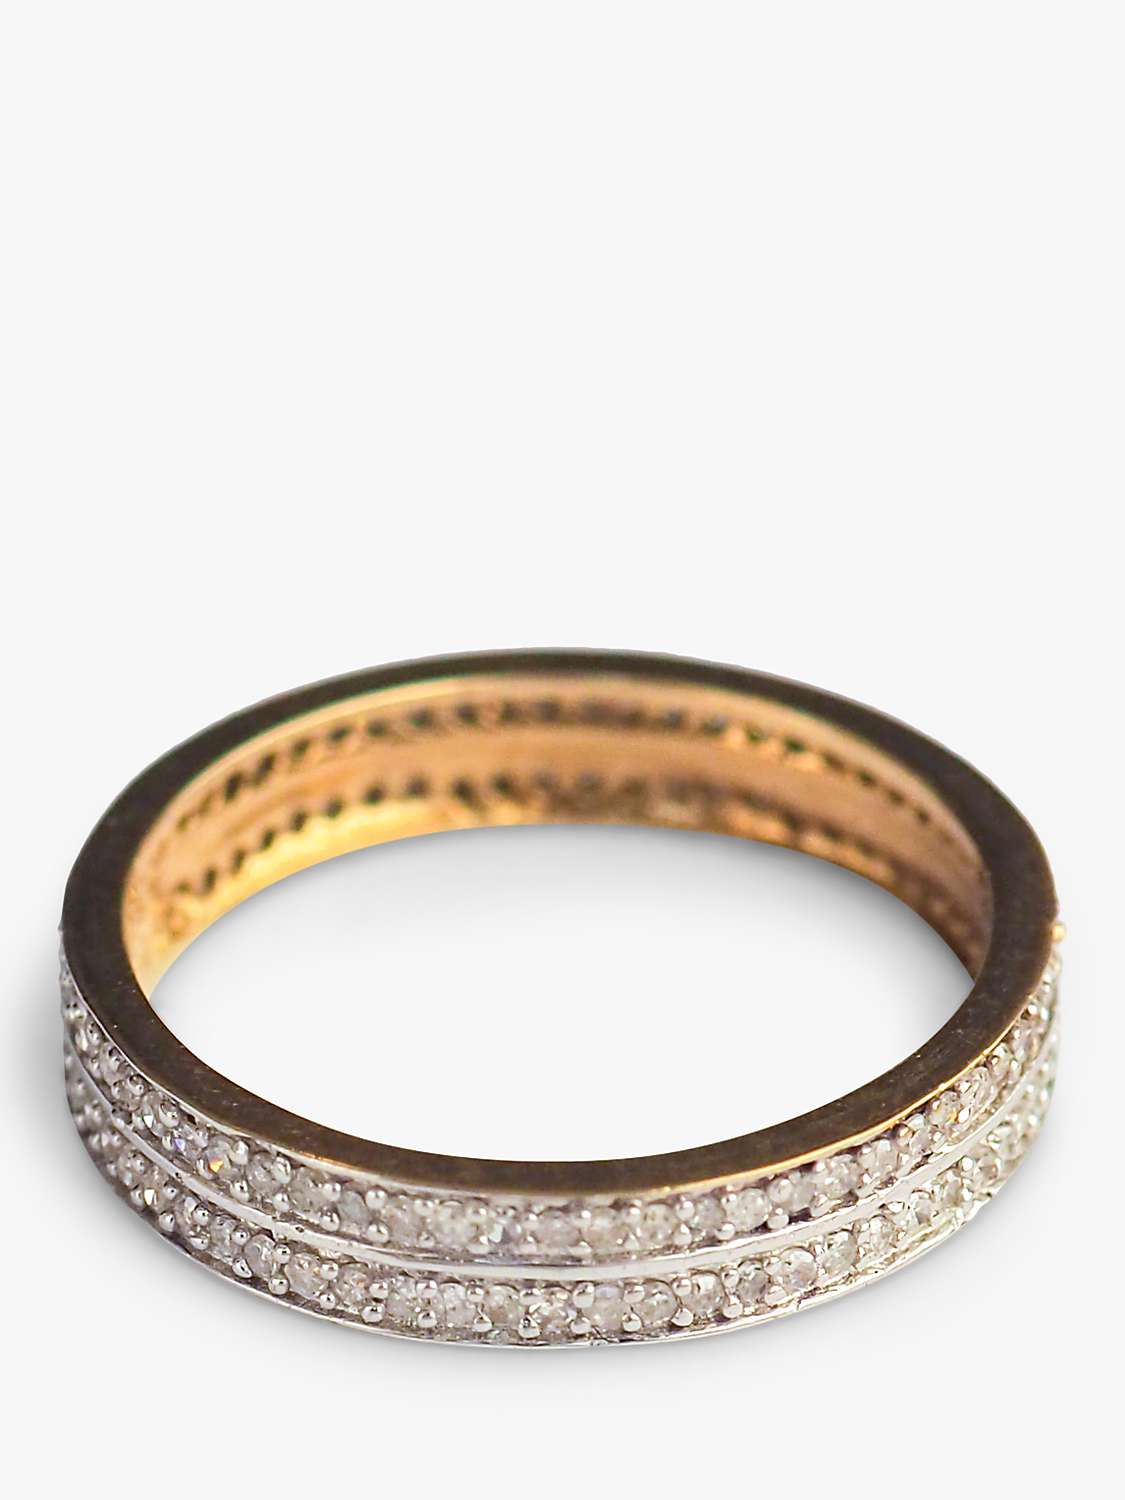 Buy L & T Heirlooms Second Hand Double Row Diamond Eternity Band Ring Online at johnlewis.com